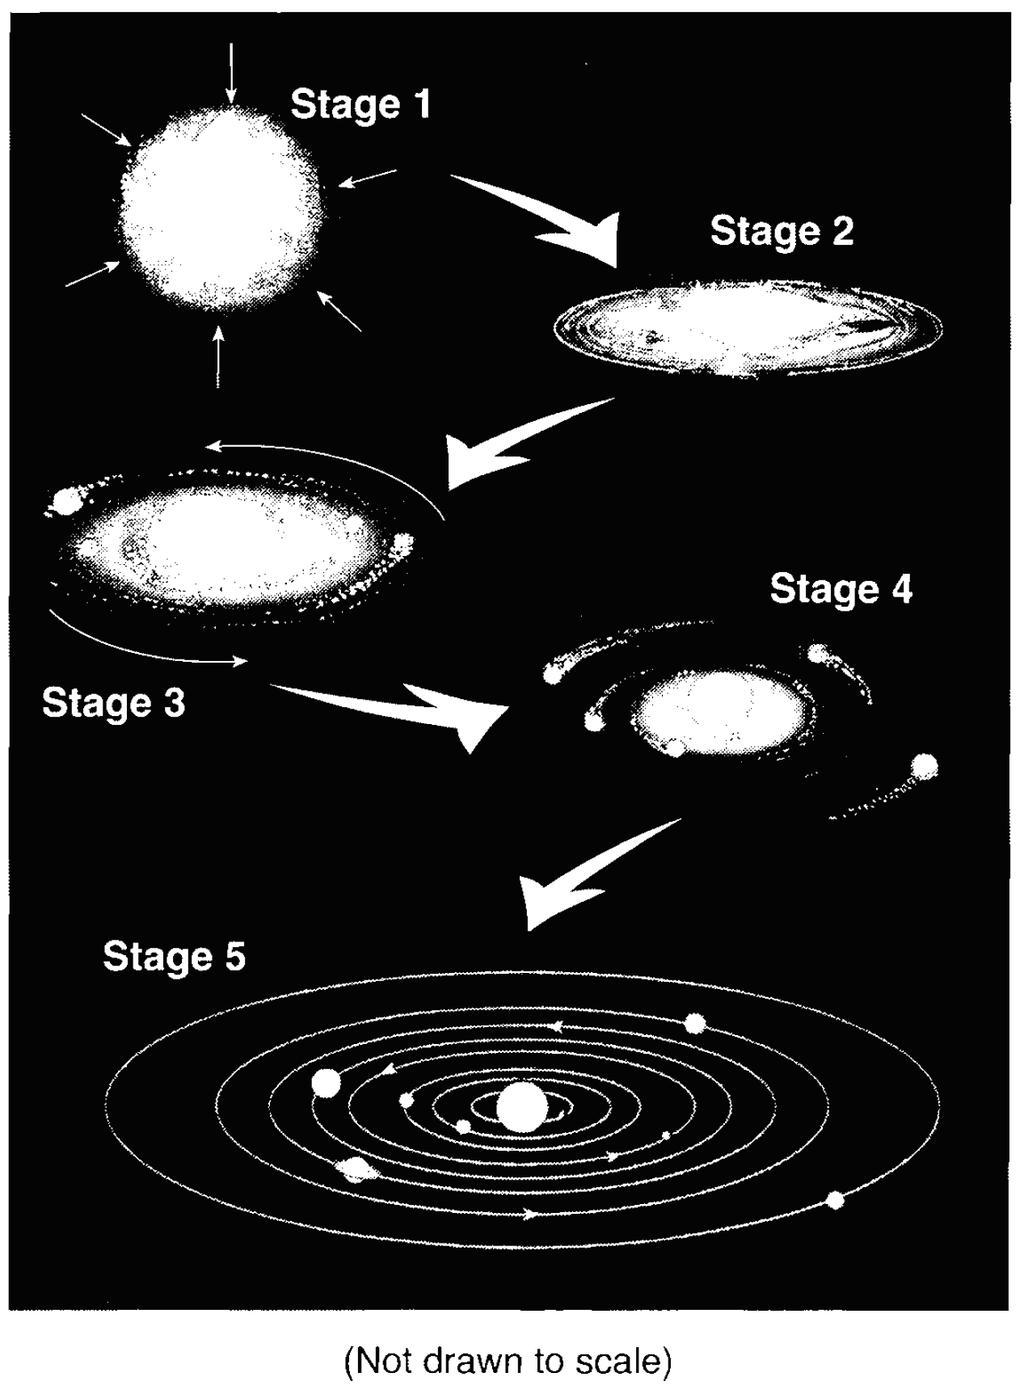 122. Base your answer to the following question on the diagram below. The diagram represents the inferred stages in the formation of our solar system. Stage 1 shows a contracting gas cloud.